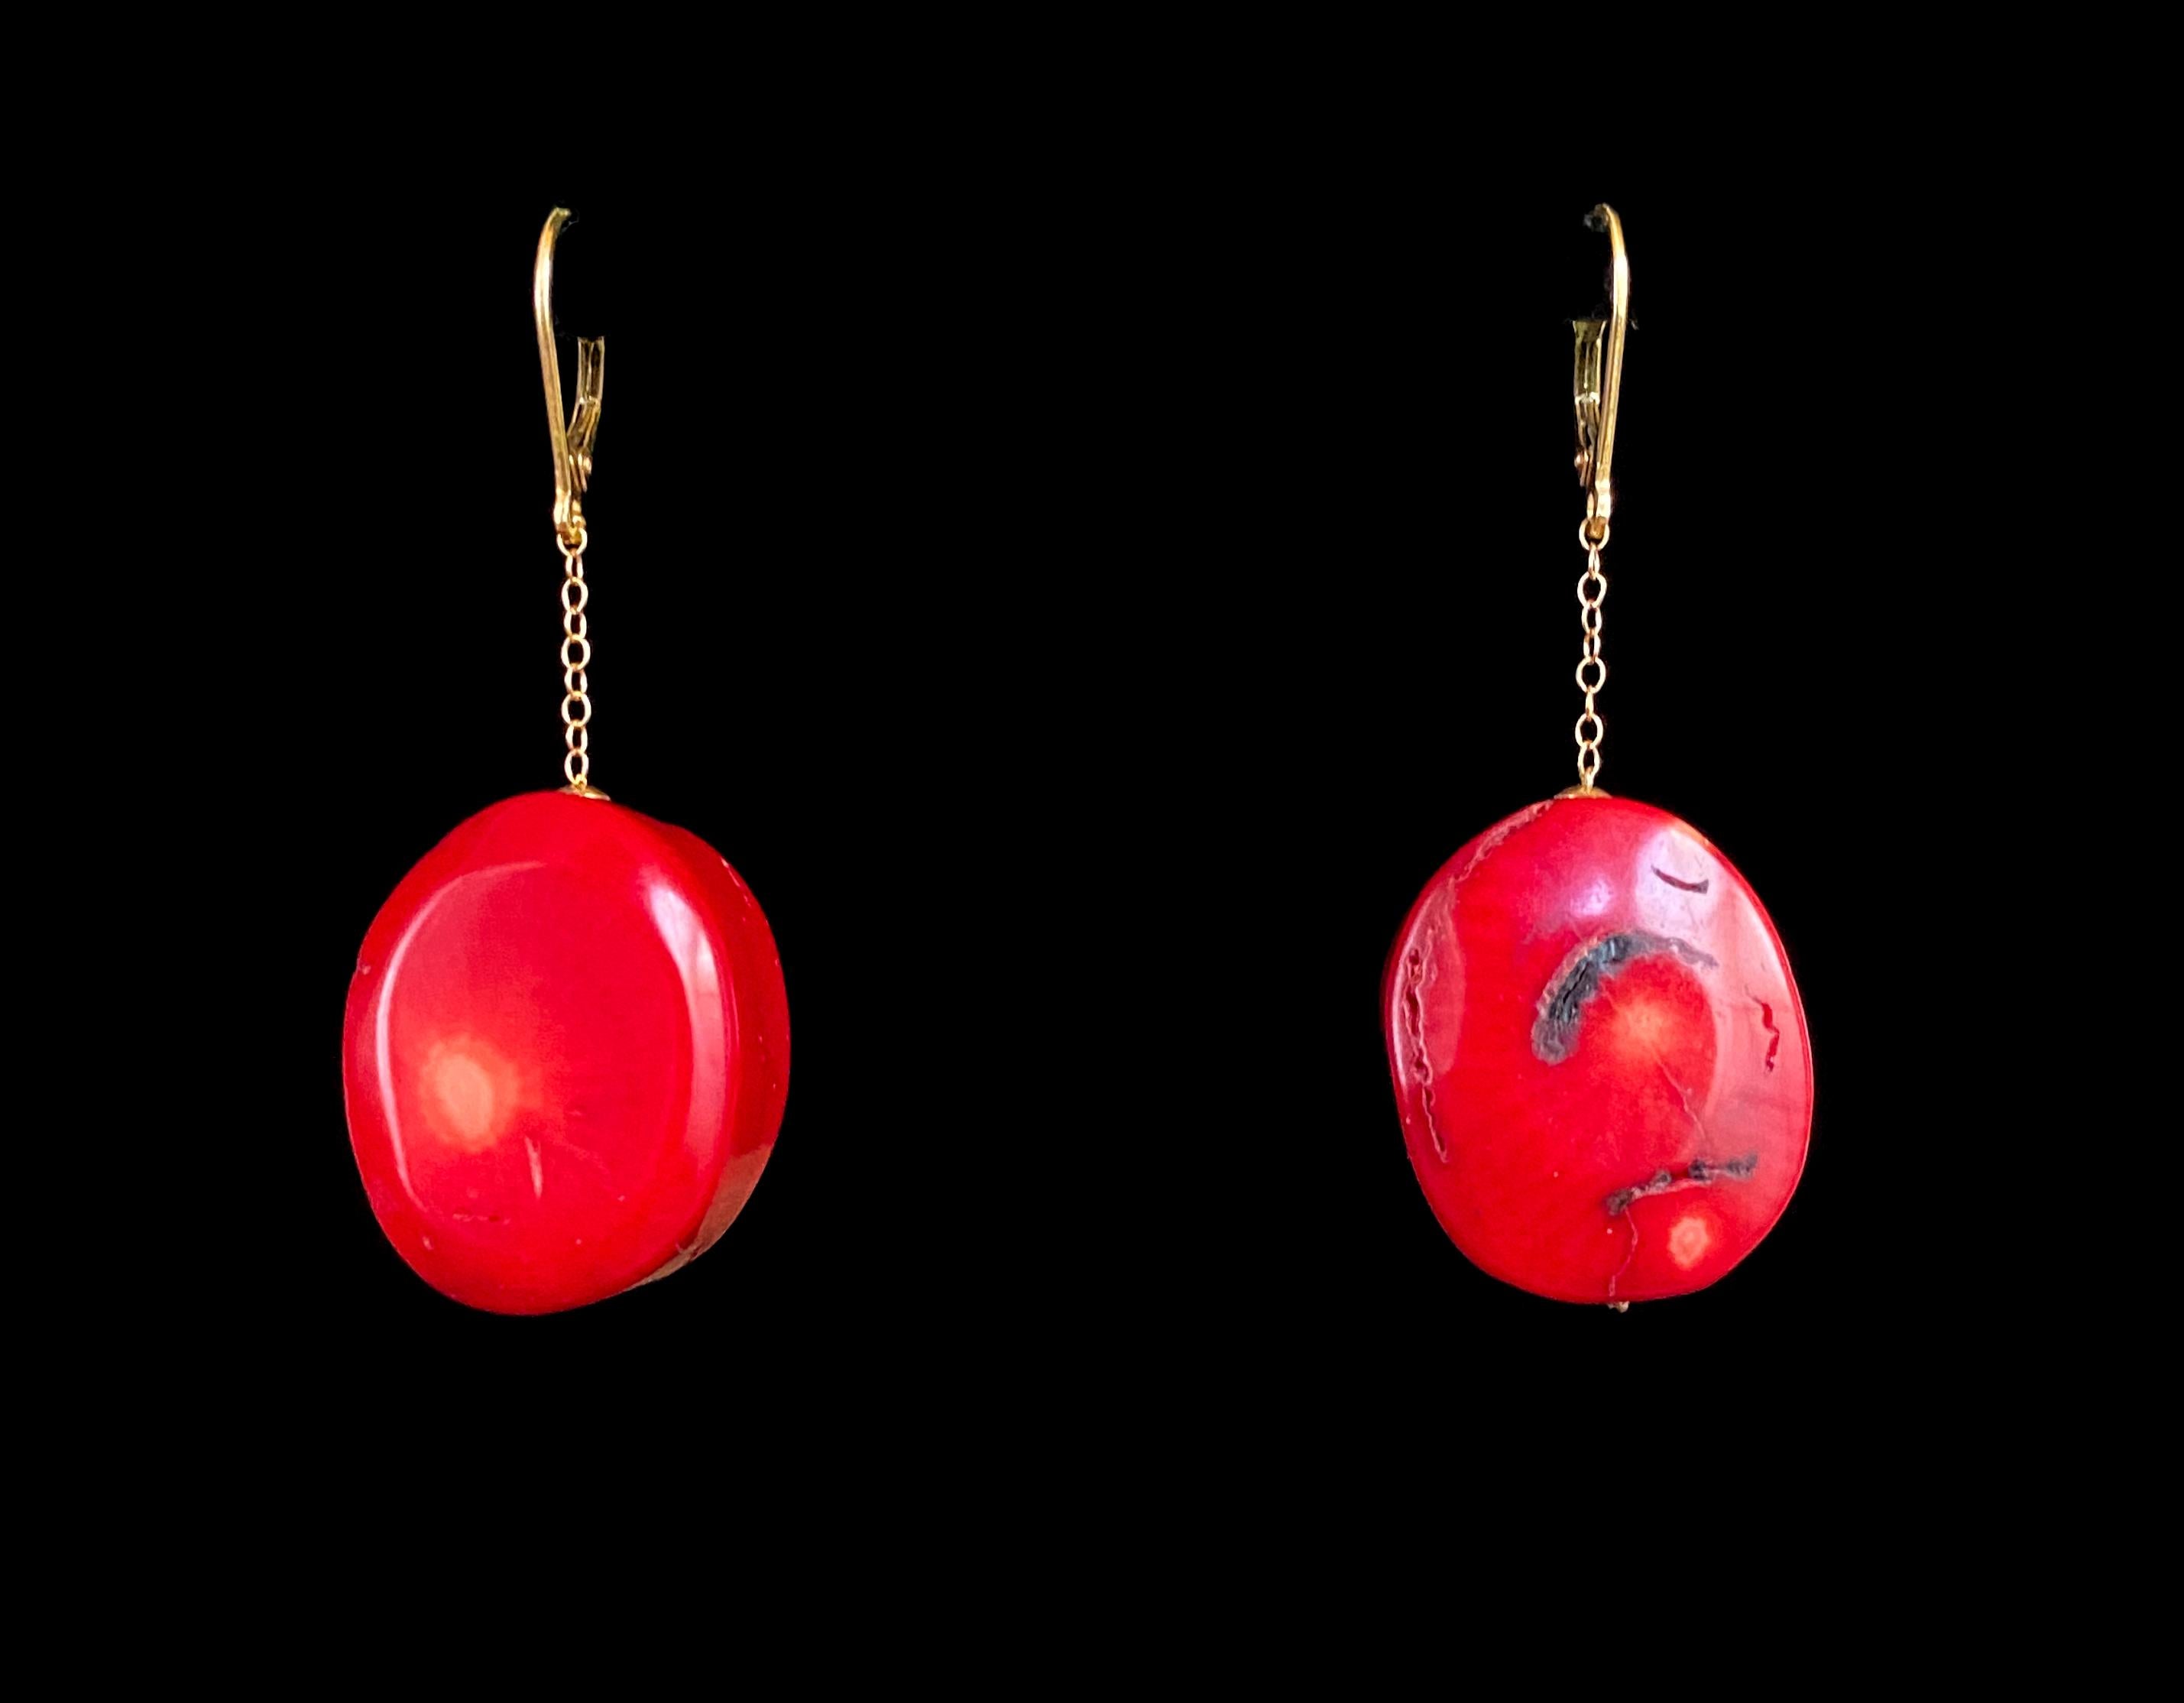 Marina J. presents these stunning Coral Earrings. This pair is made with two vibrant red Corals displaying organic inclusions and patterns. The Coral stones are 23 mm long, and perfectly complimented by the solid 14k Yellow Gold chain and hooks.